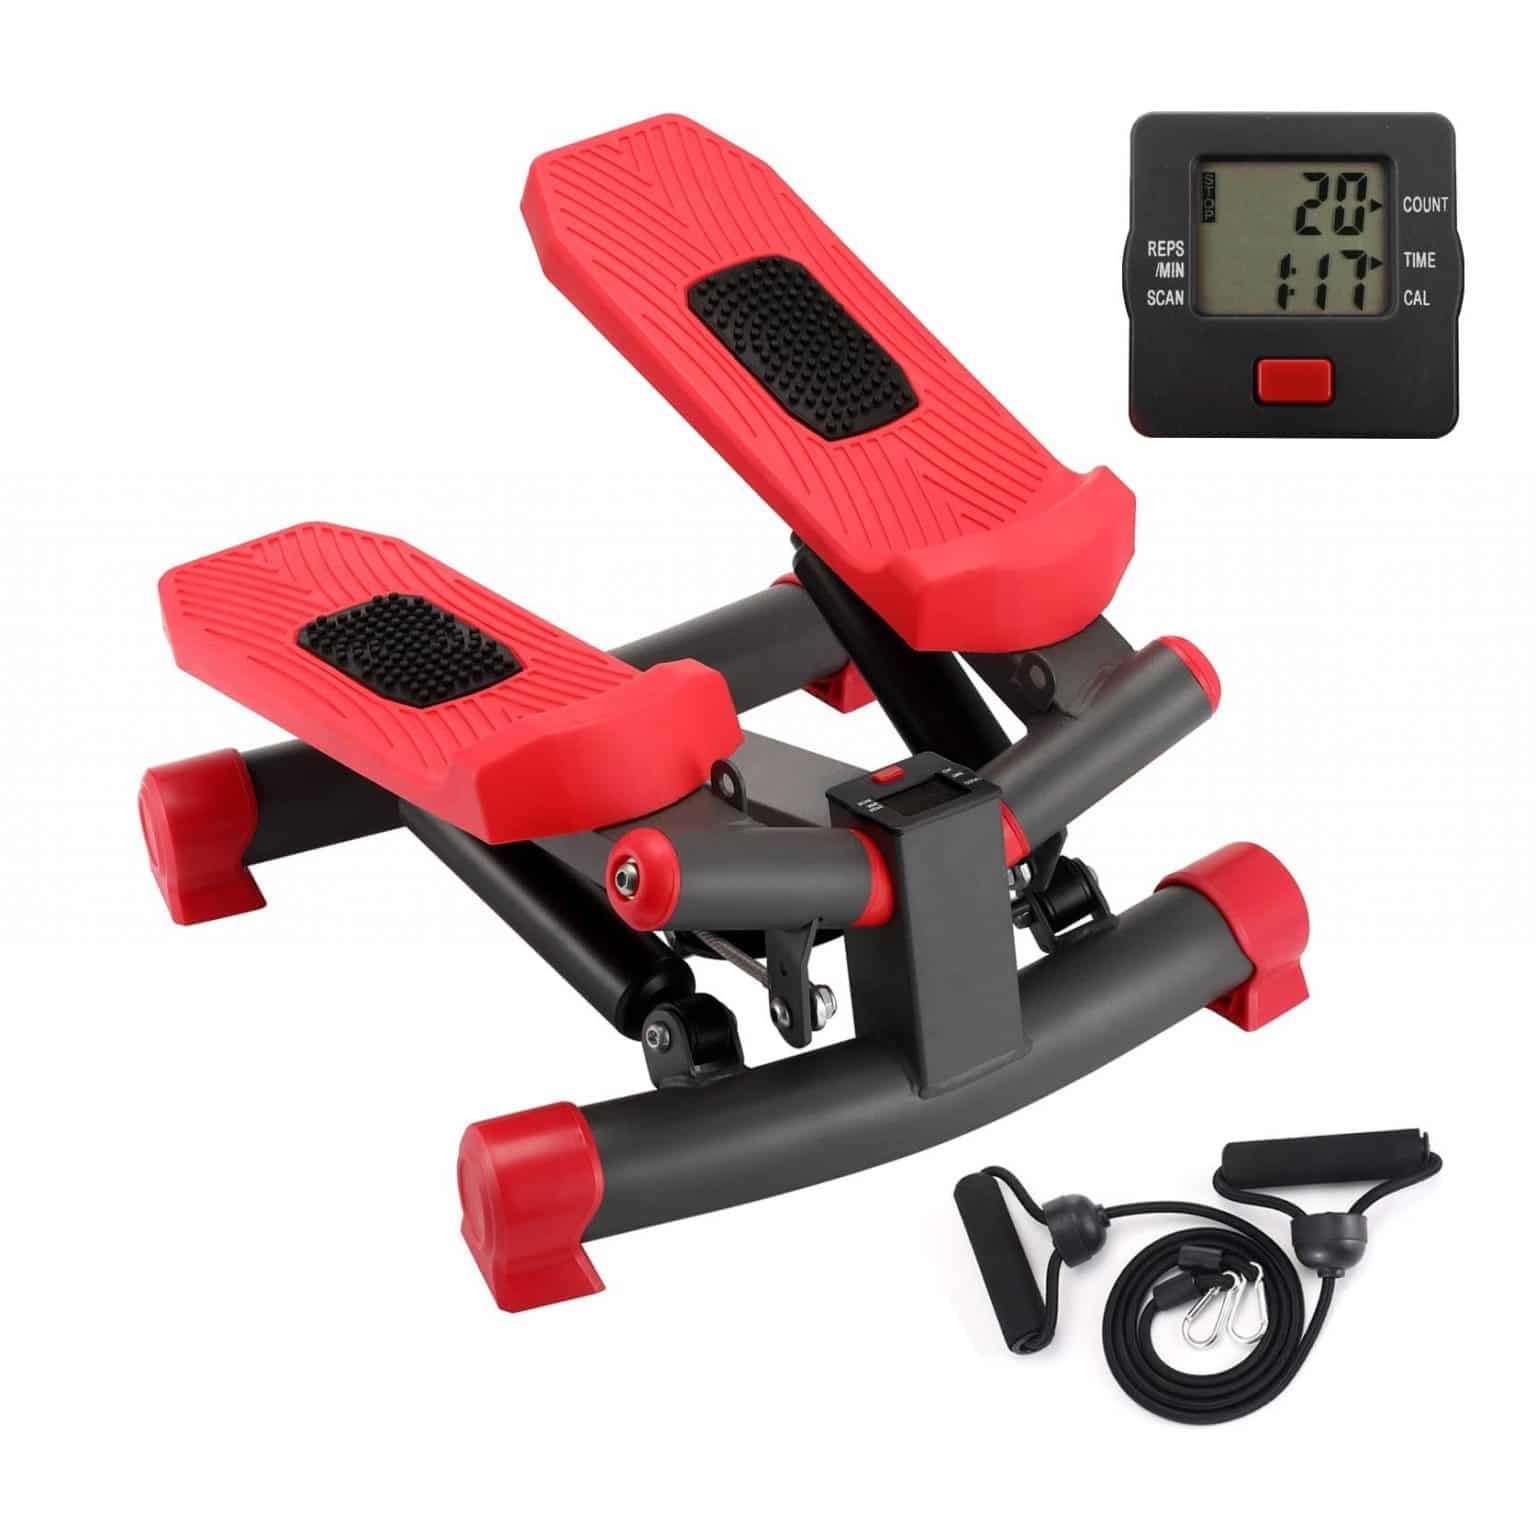 Top 10 Best Mini Stair Steppers in 2021 Reviews Buyer’s Guide